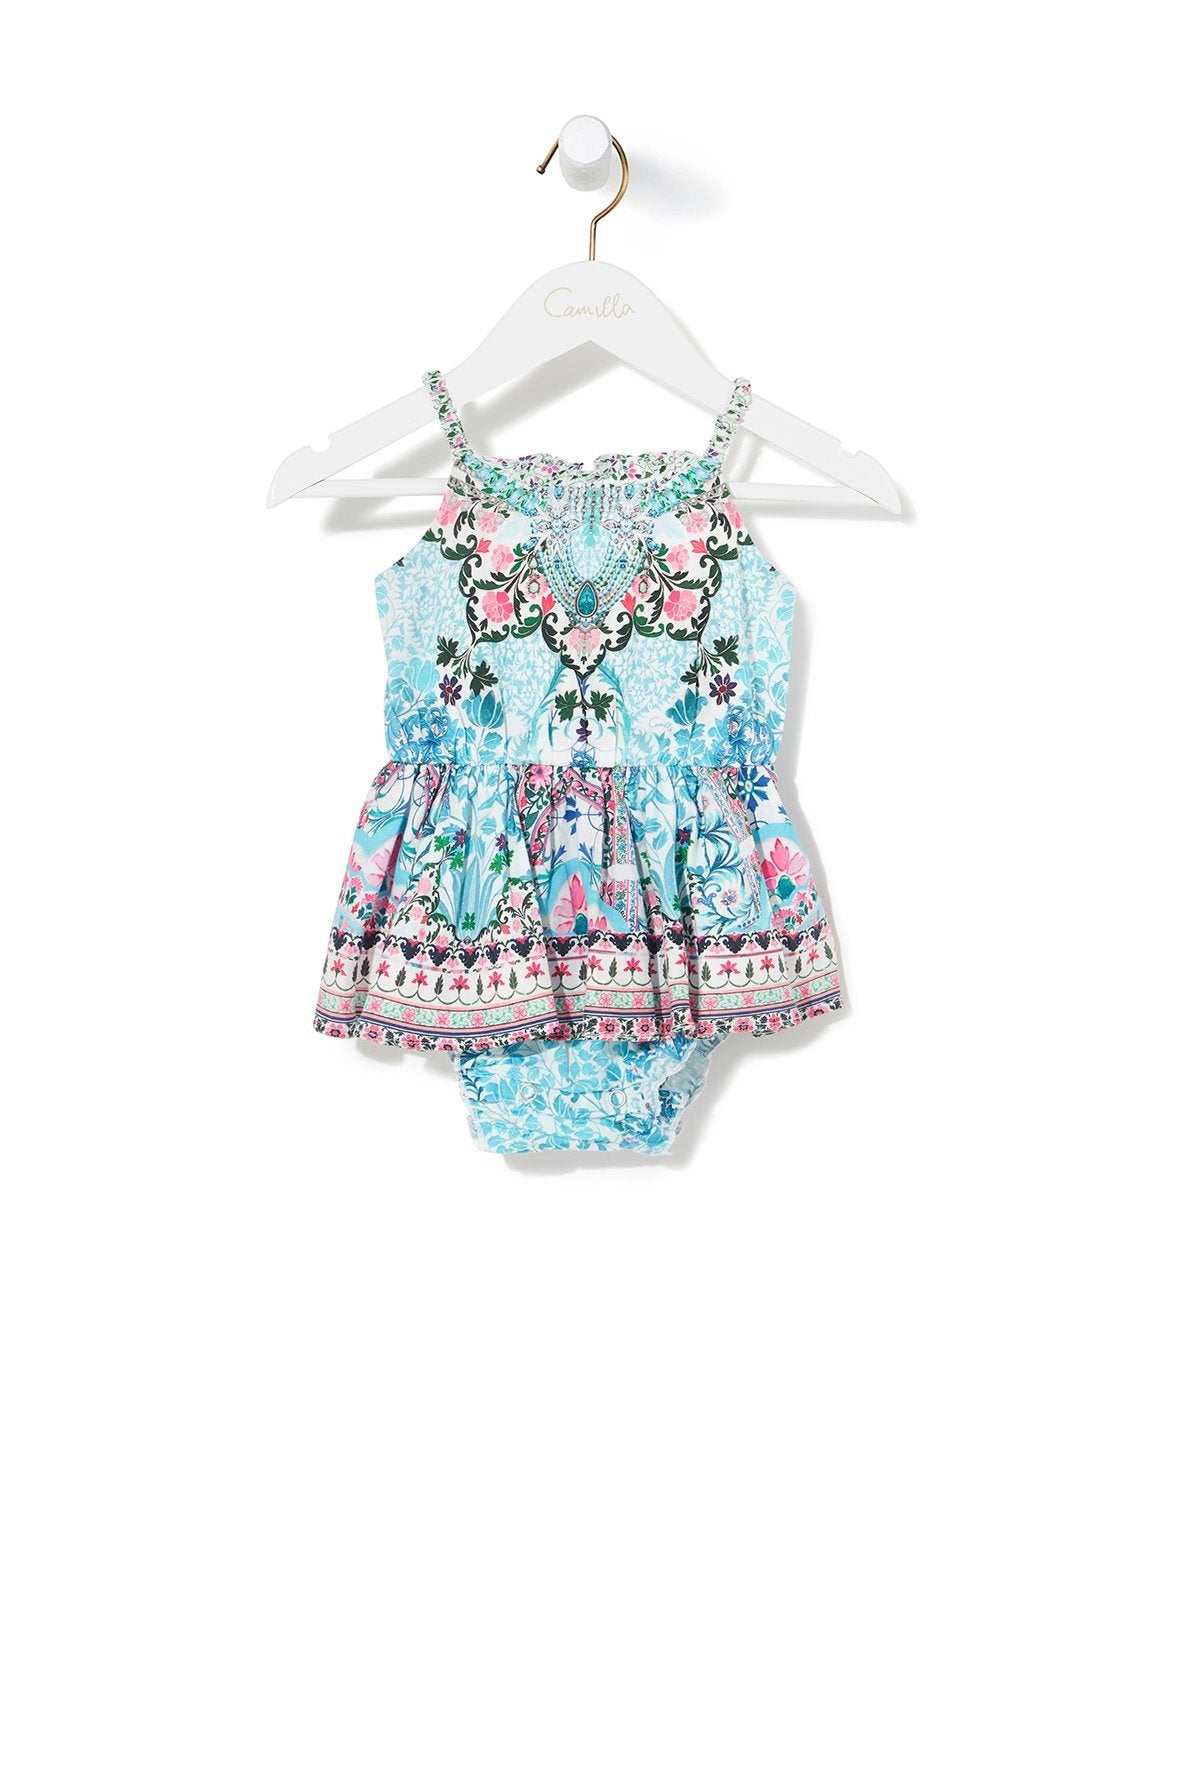 LOVERS RETREAT TODDLERS JUMP DRESS